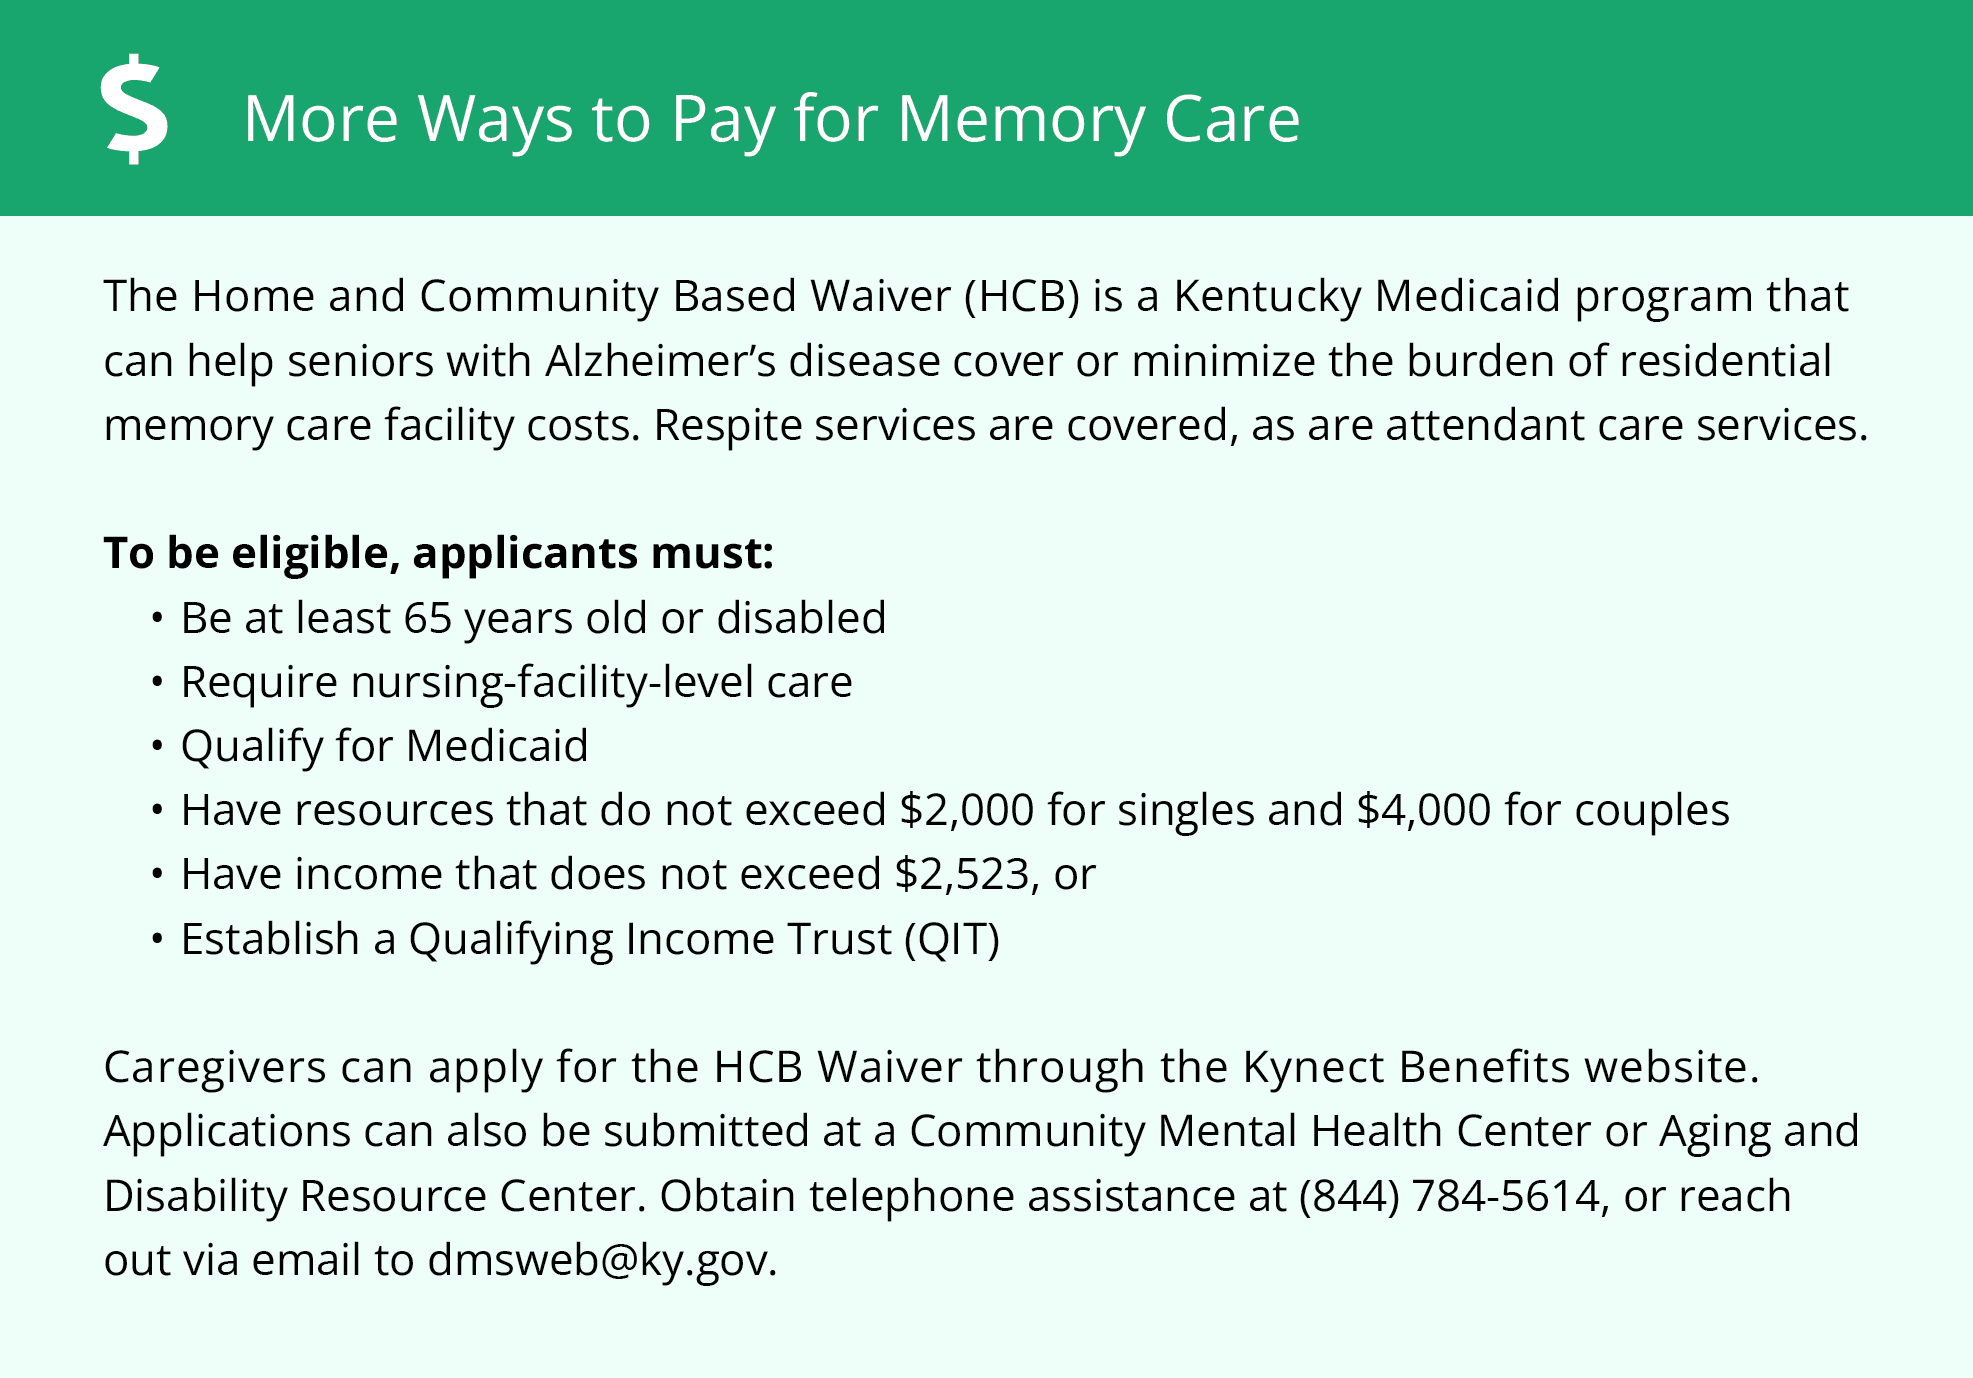 Financial Assistance for Memory Care in Kentucky